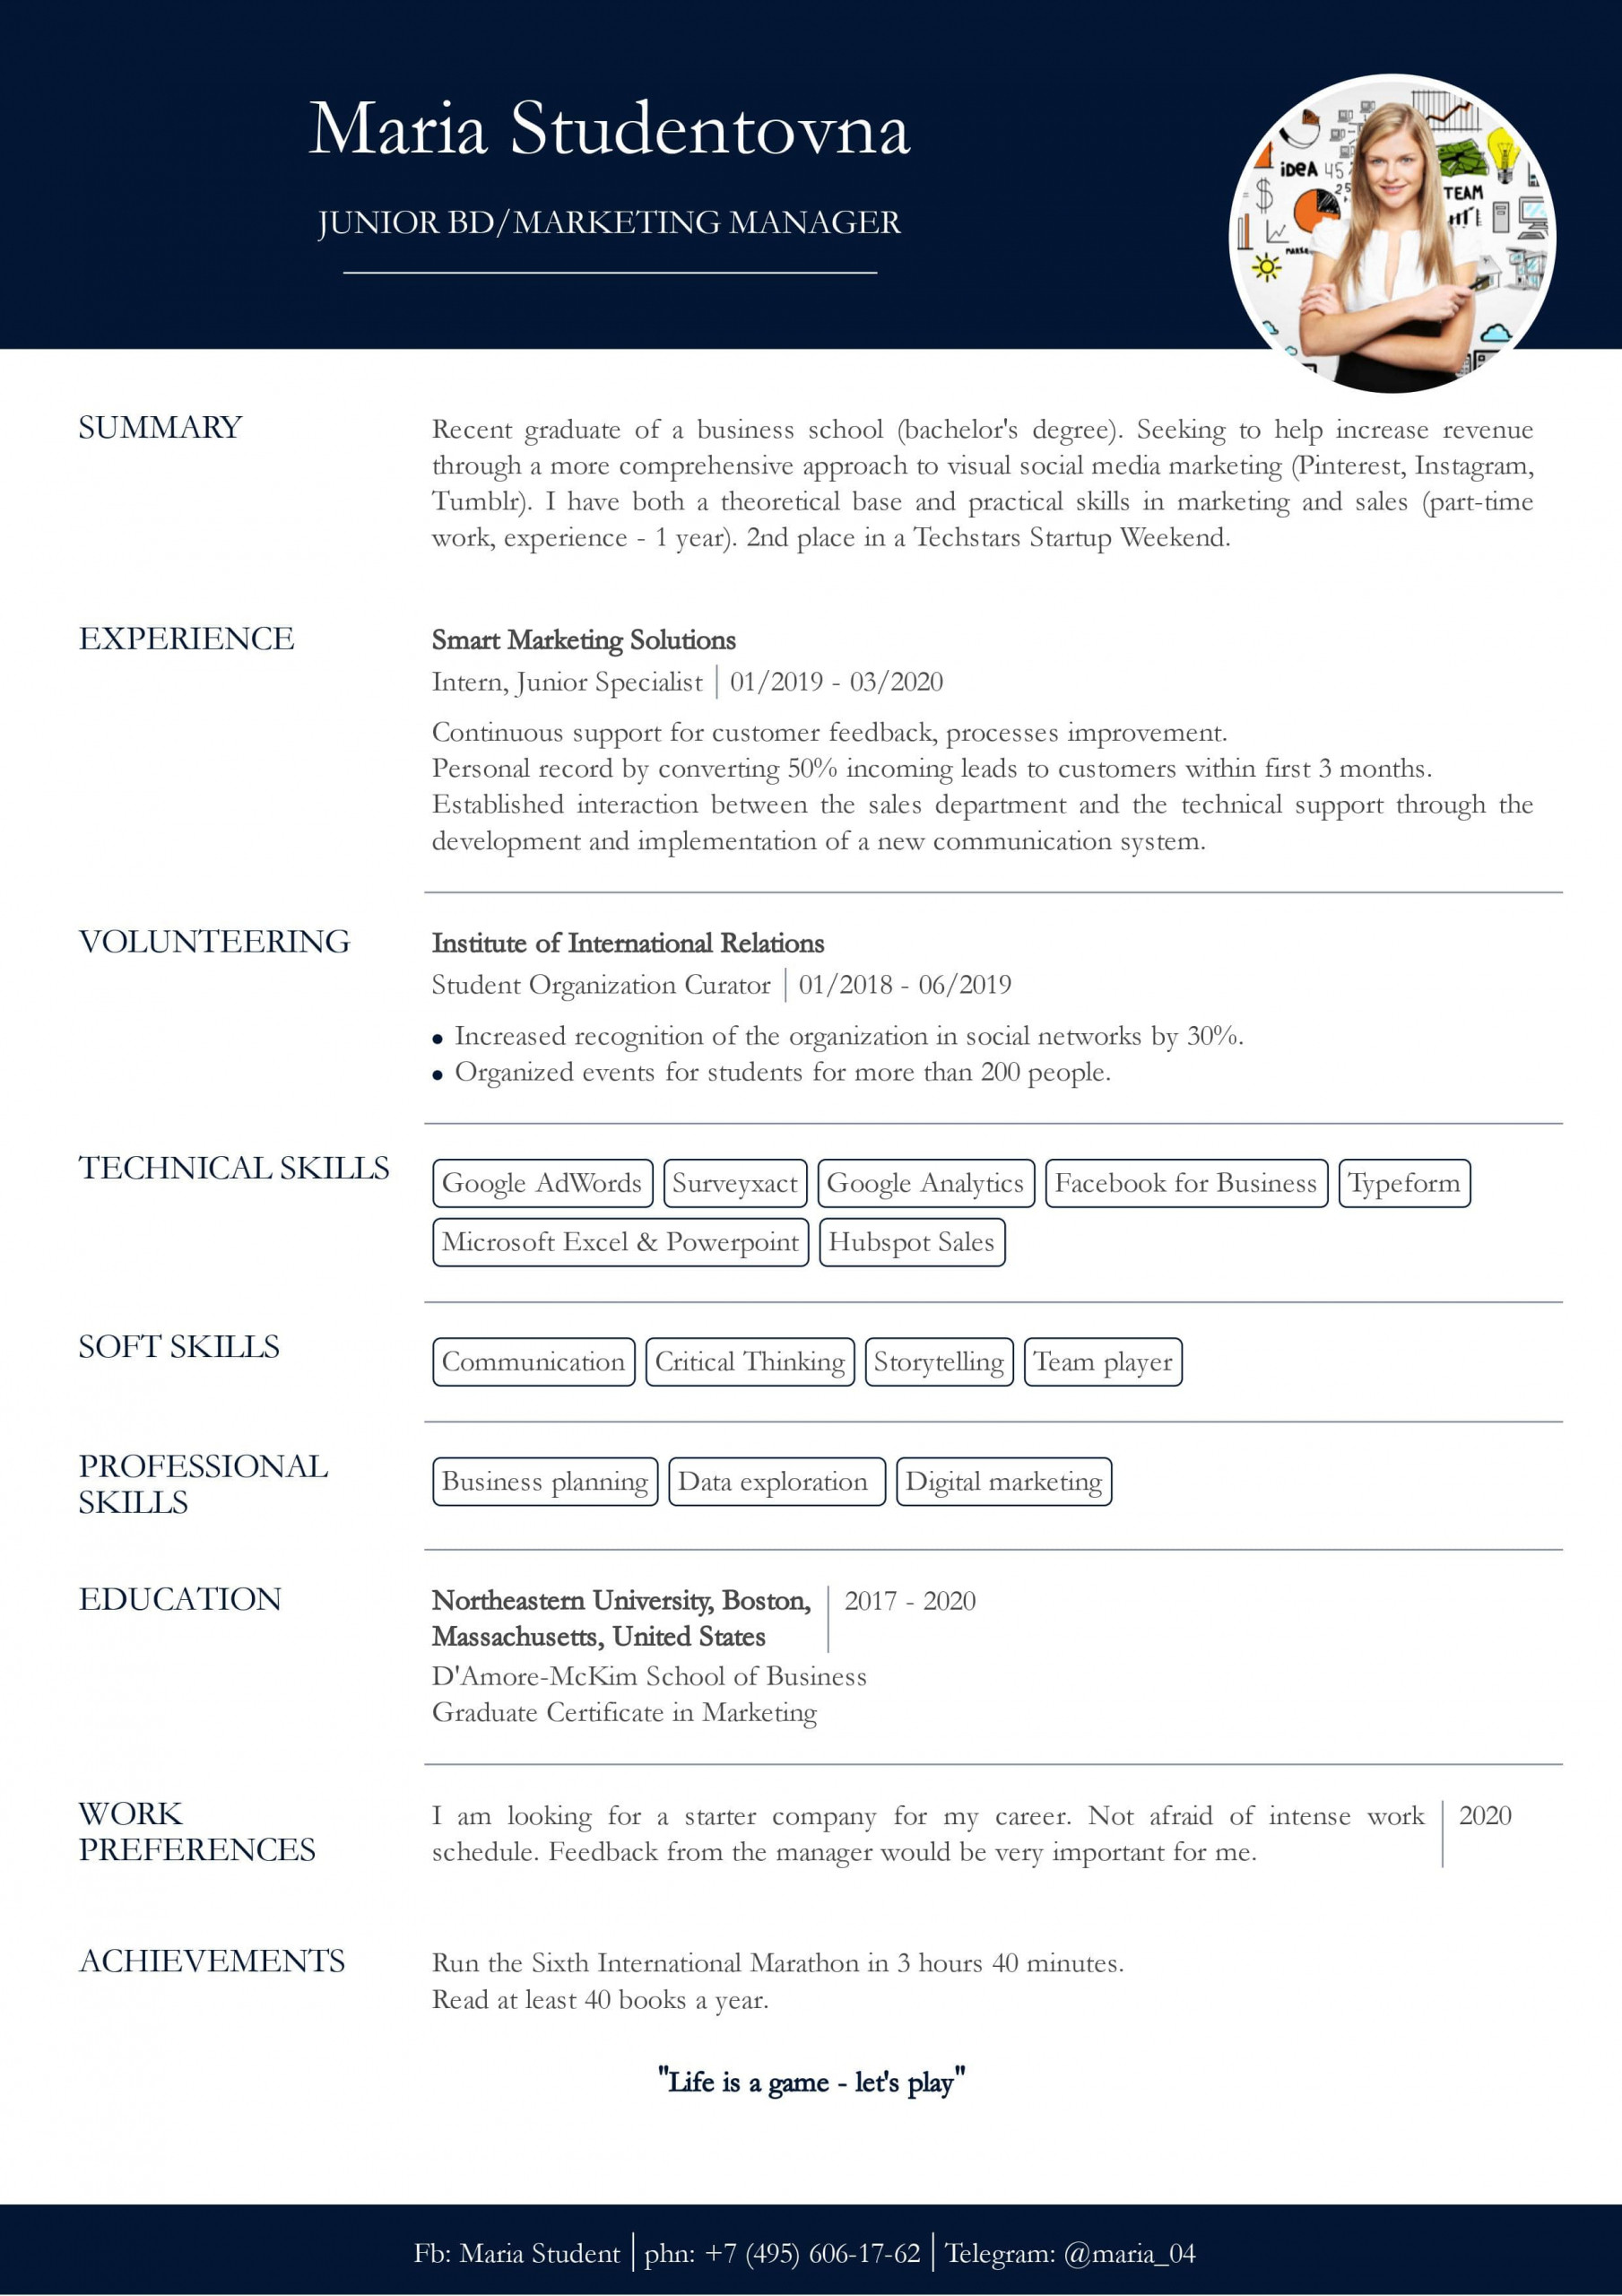 Resume Sample for High School Graduate with No Work Experience Resume with No Work Experience. Sample for Students. – Cv2you Blog